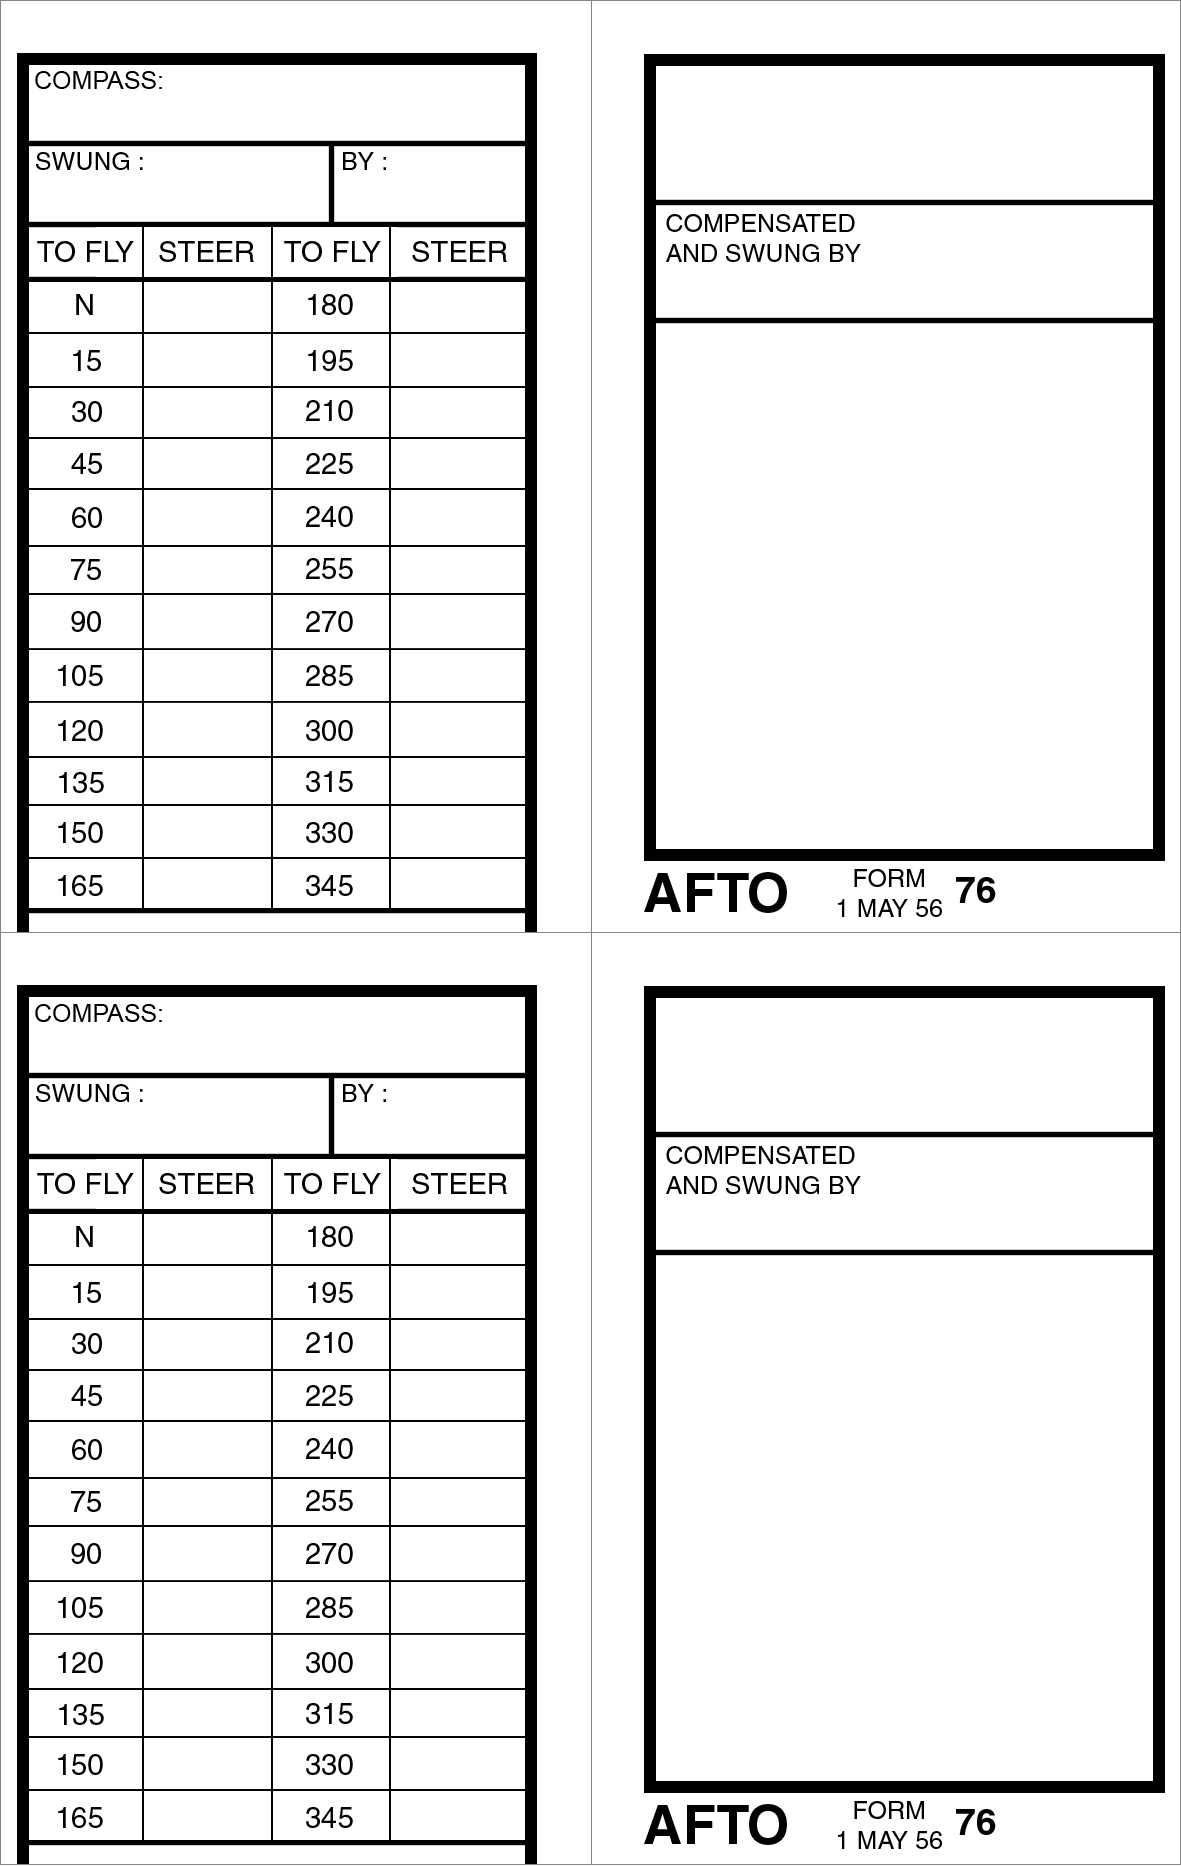 Compass Deviation Card Template ] - Can Be Found At Quot Throughout Compass Deviation Card Template